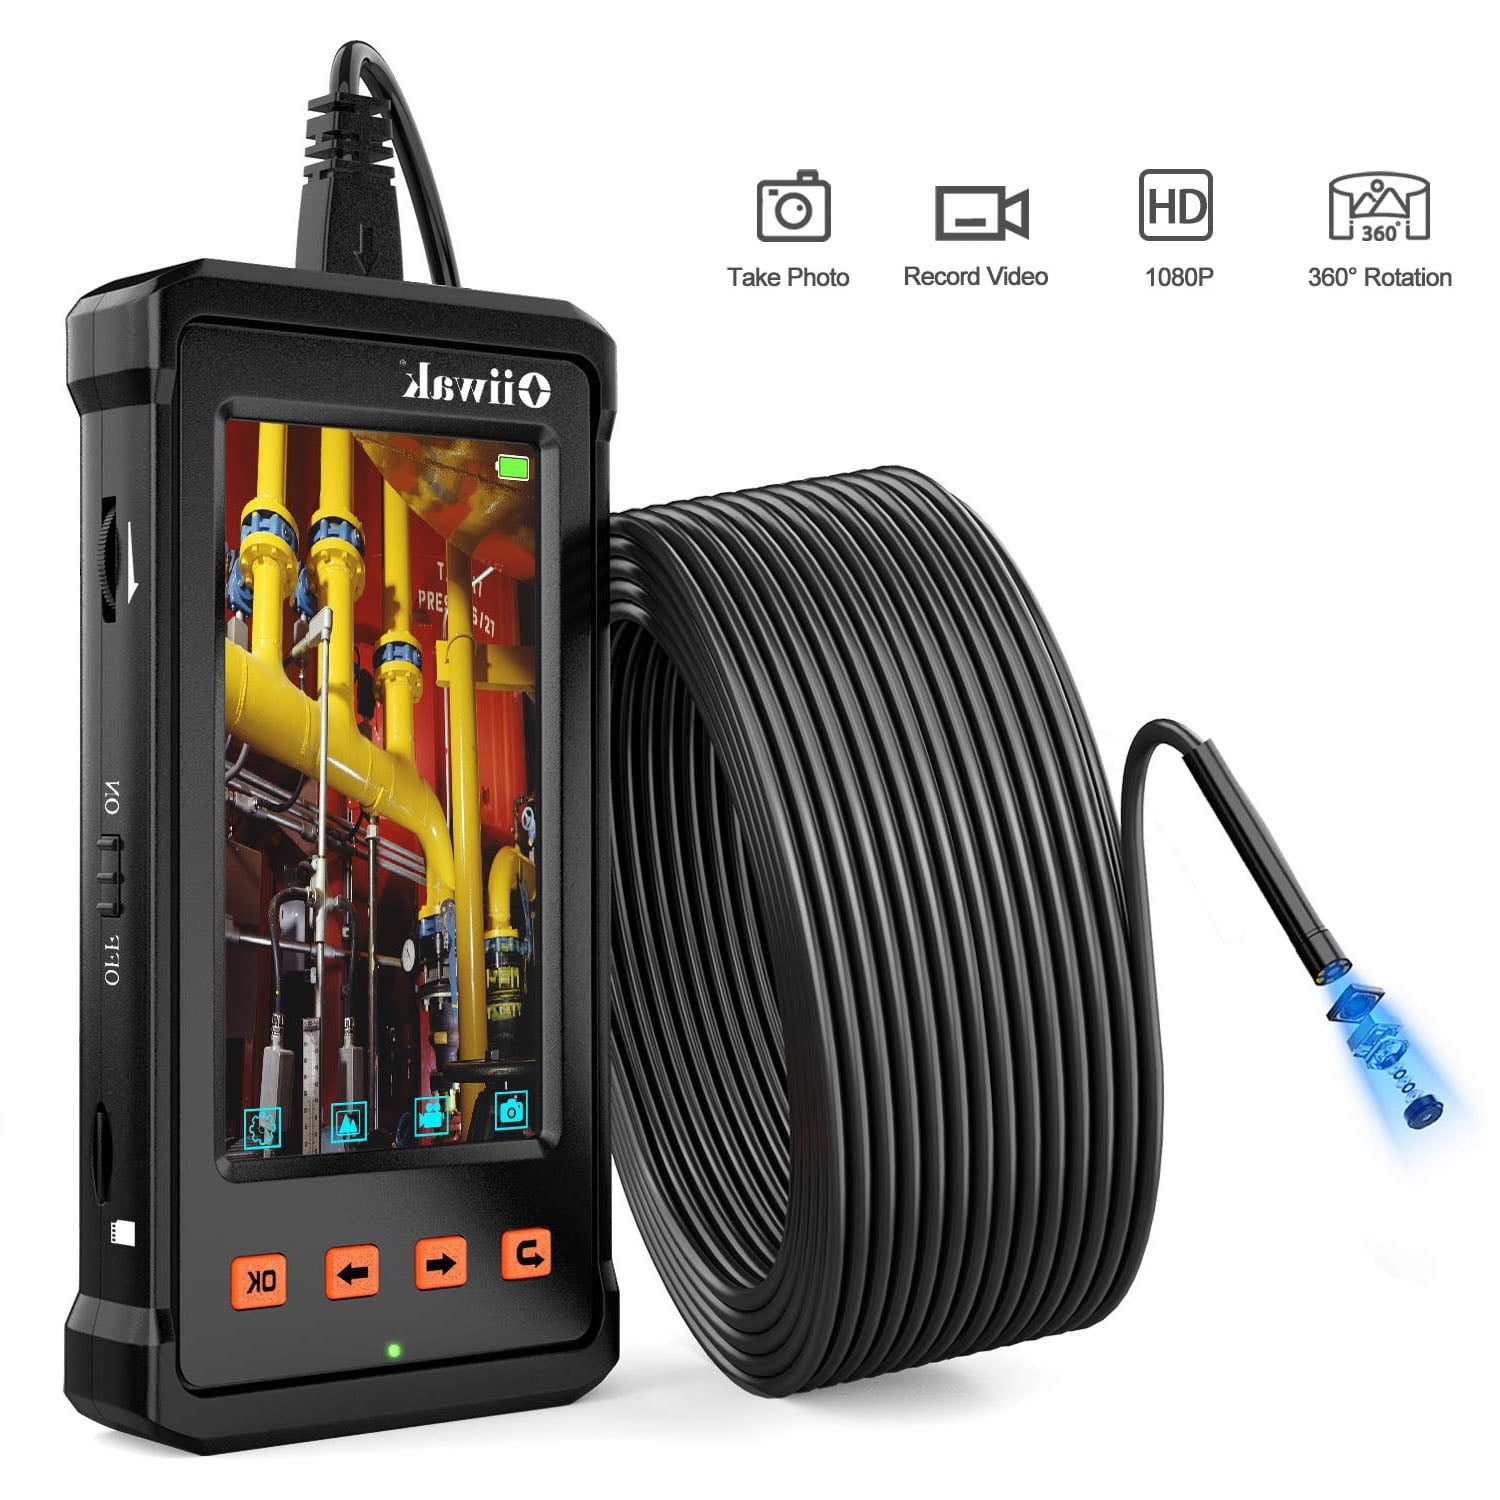 50FT Industrial Endoscope Oiiwak Borescope Camera for Pipe Sewer Drain Plumbing Inspection 1080P HD 4.3inch LCD Screen Waterproof IP68 Endoscope Snake Camera with 6 LED Lights 15m